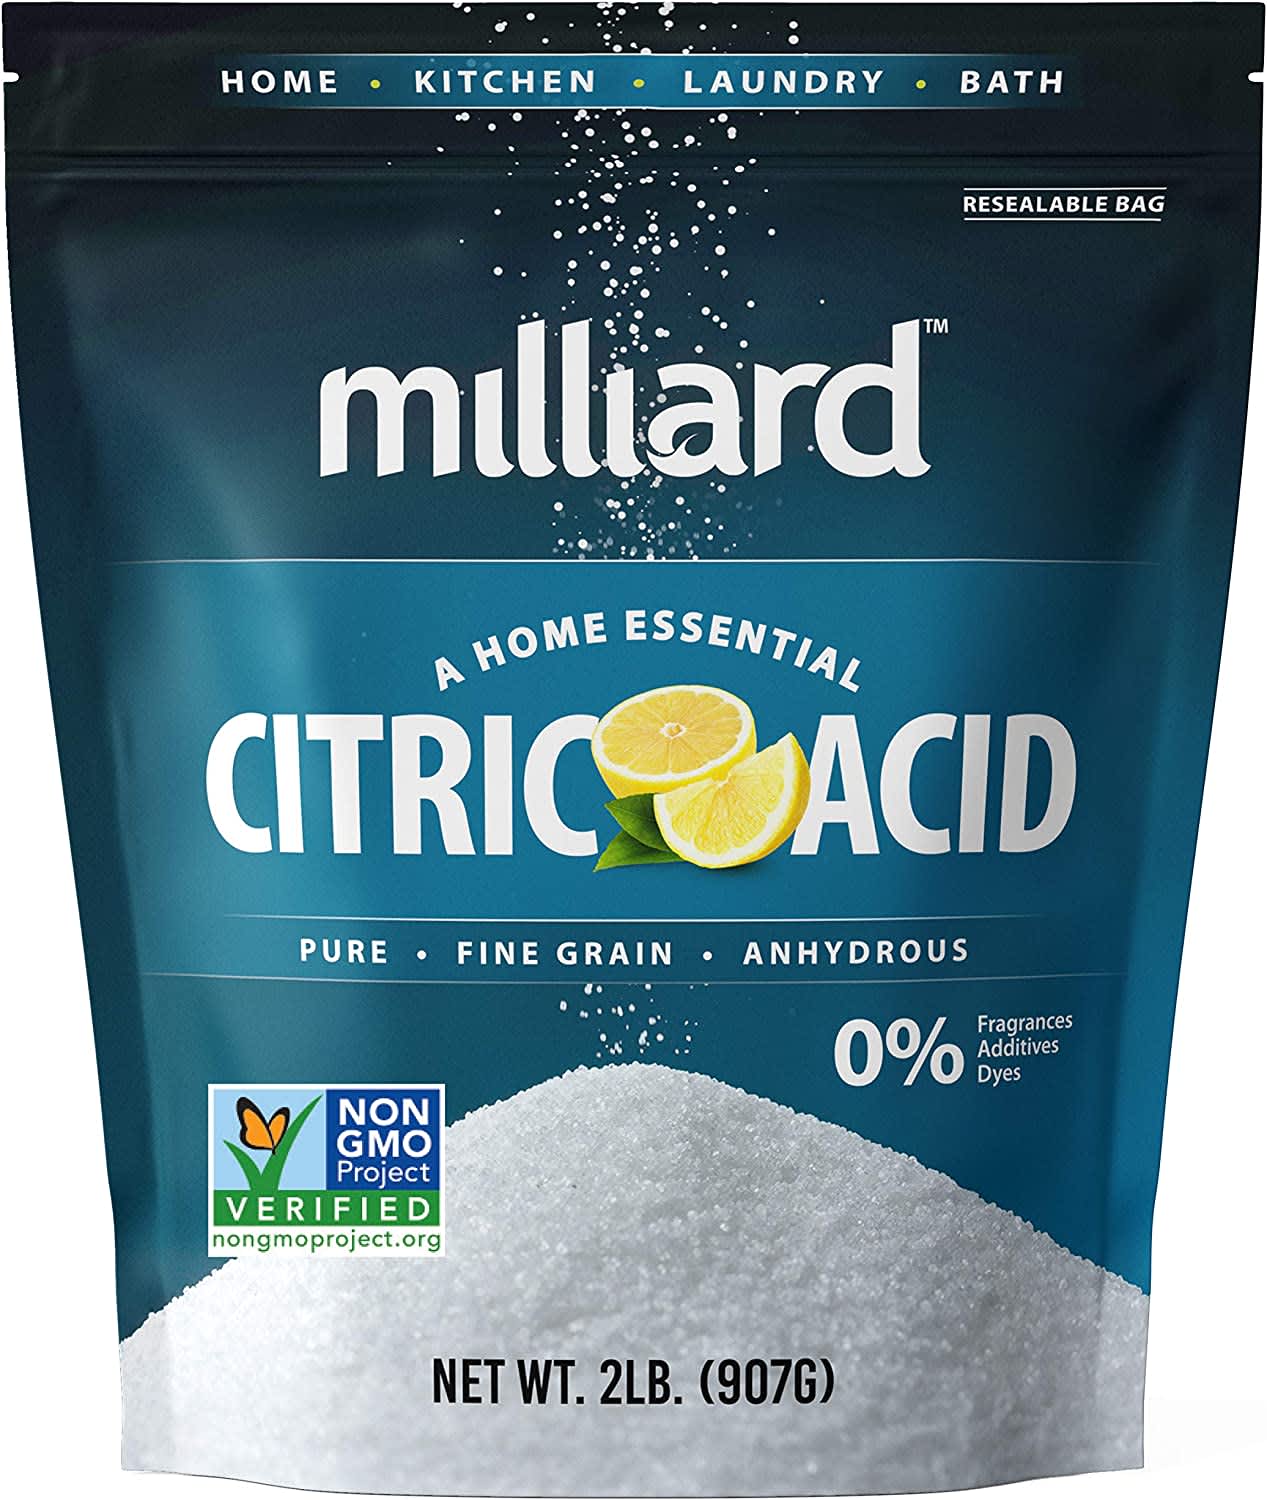 Ways to Clean with Citric Acid